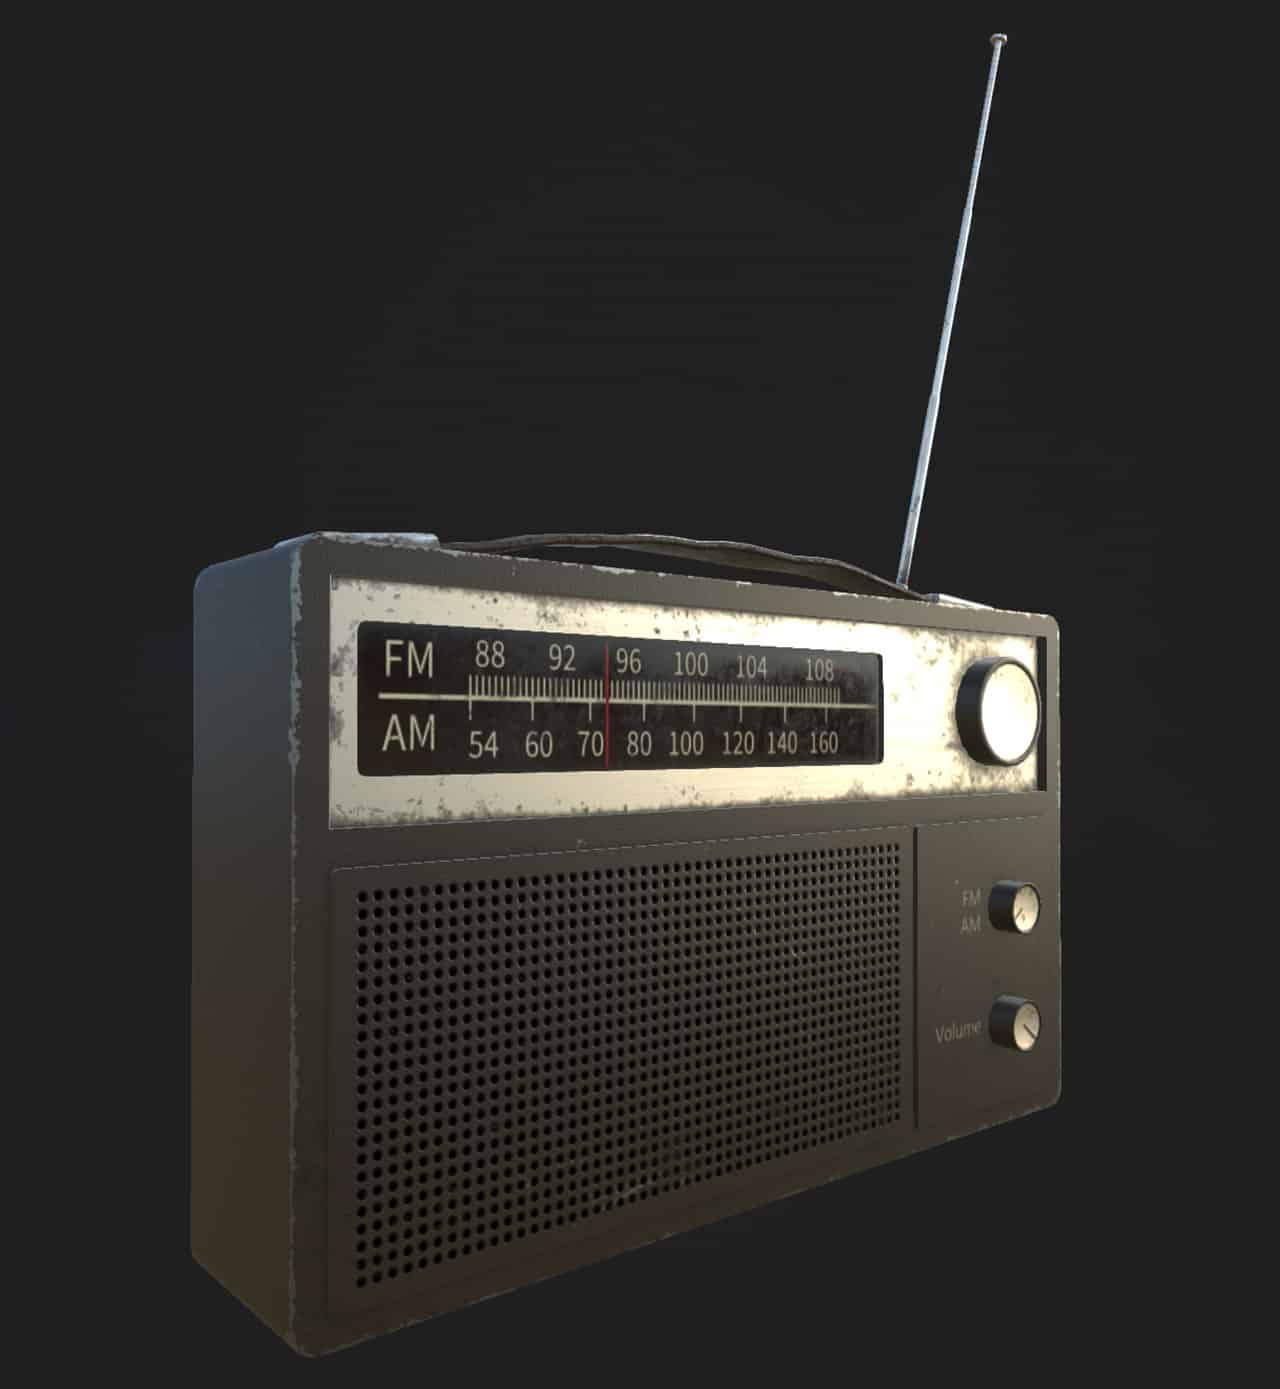 Screenshot of an old AM/FM radio with knobs, a metal antenna, and a leather handle.